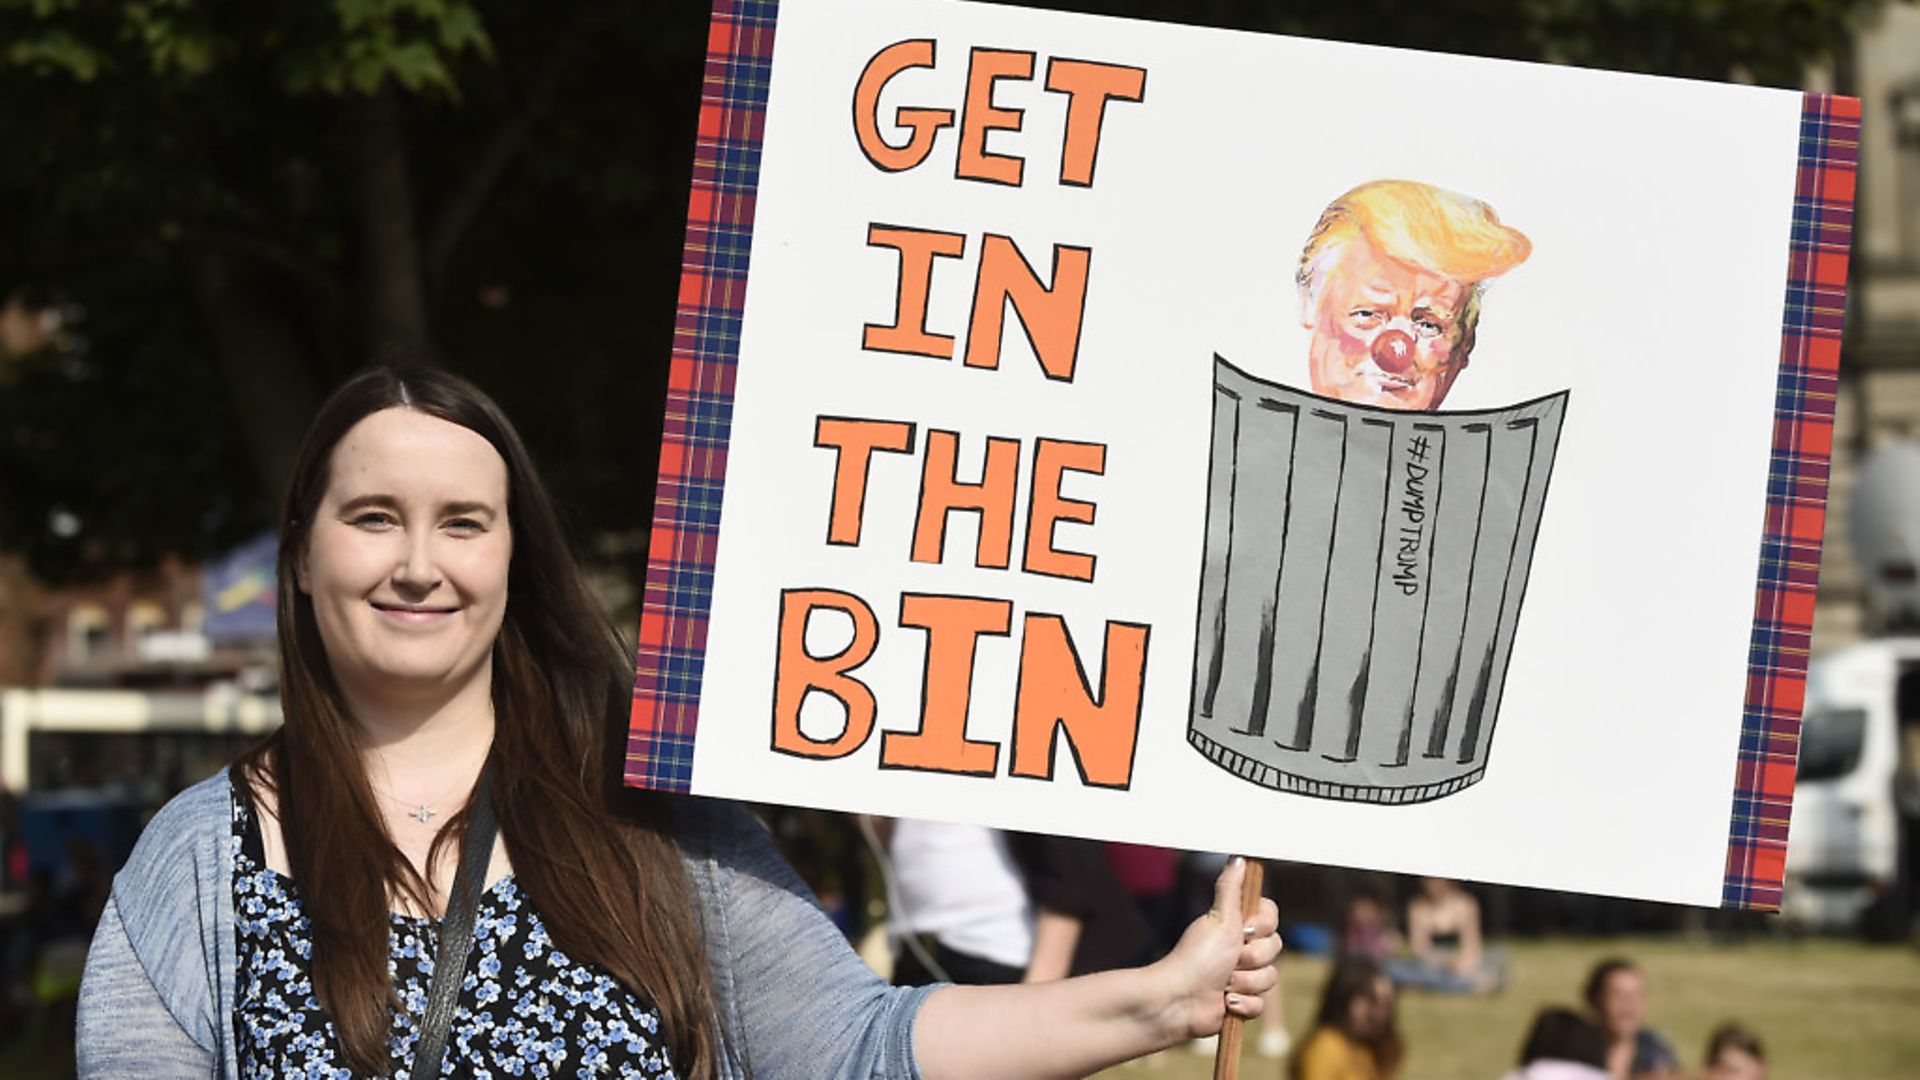 Demonstrators in George Square, Glasgow, for the Scotland United Against Trump protest against the visit of US President Donald Trump to the UK. Photograph: Lesley Martin/PA Wire - Credit: PA